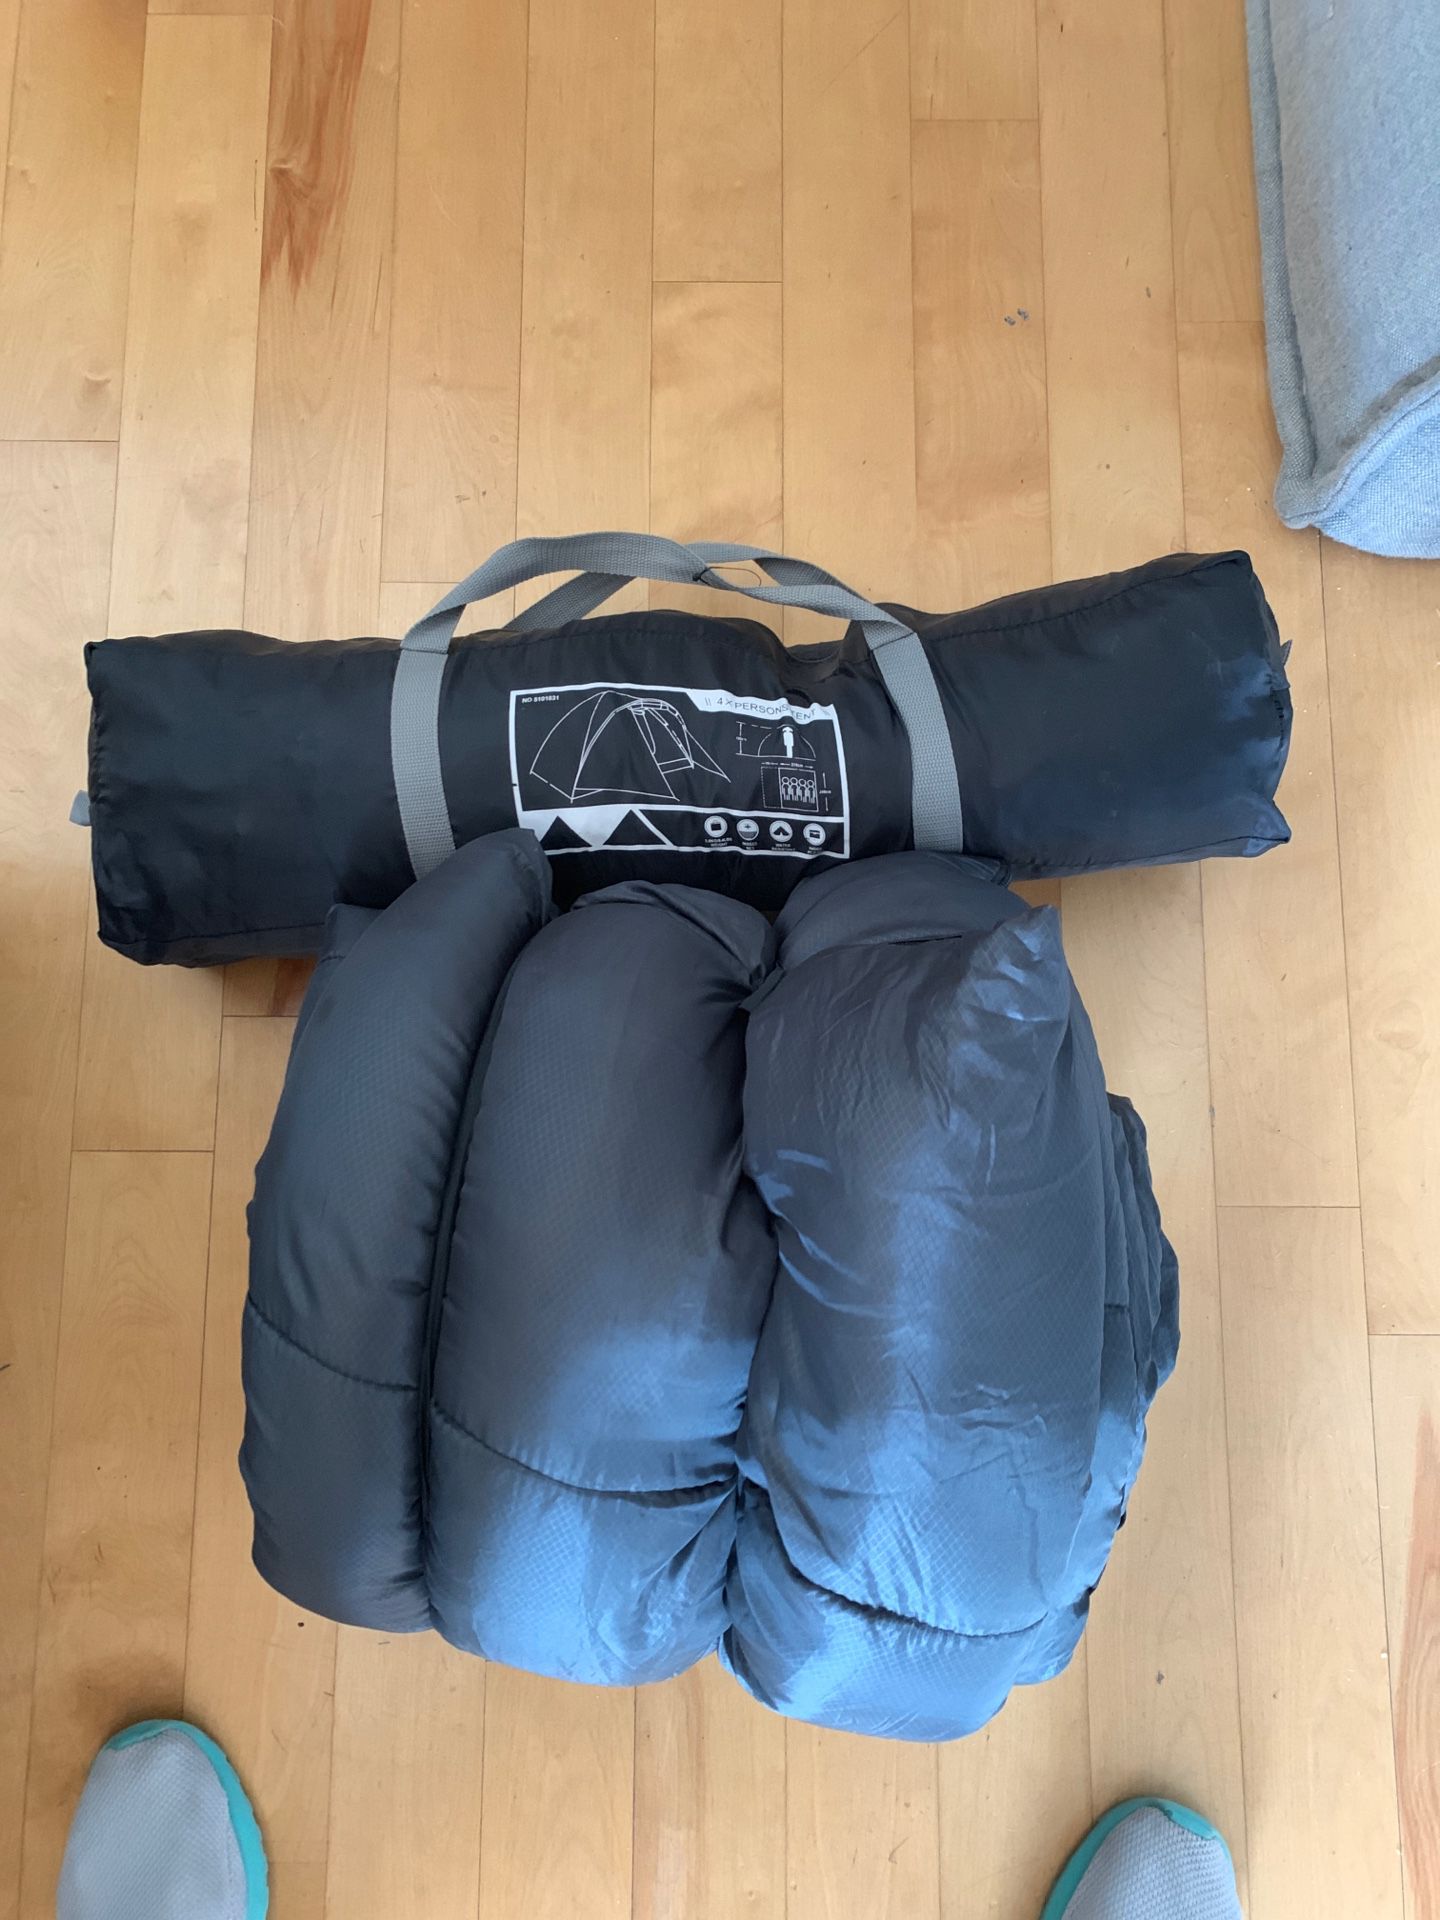 4 person tent and sleeping bag